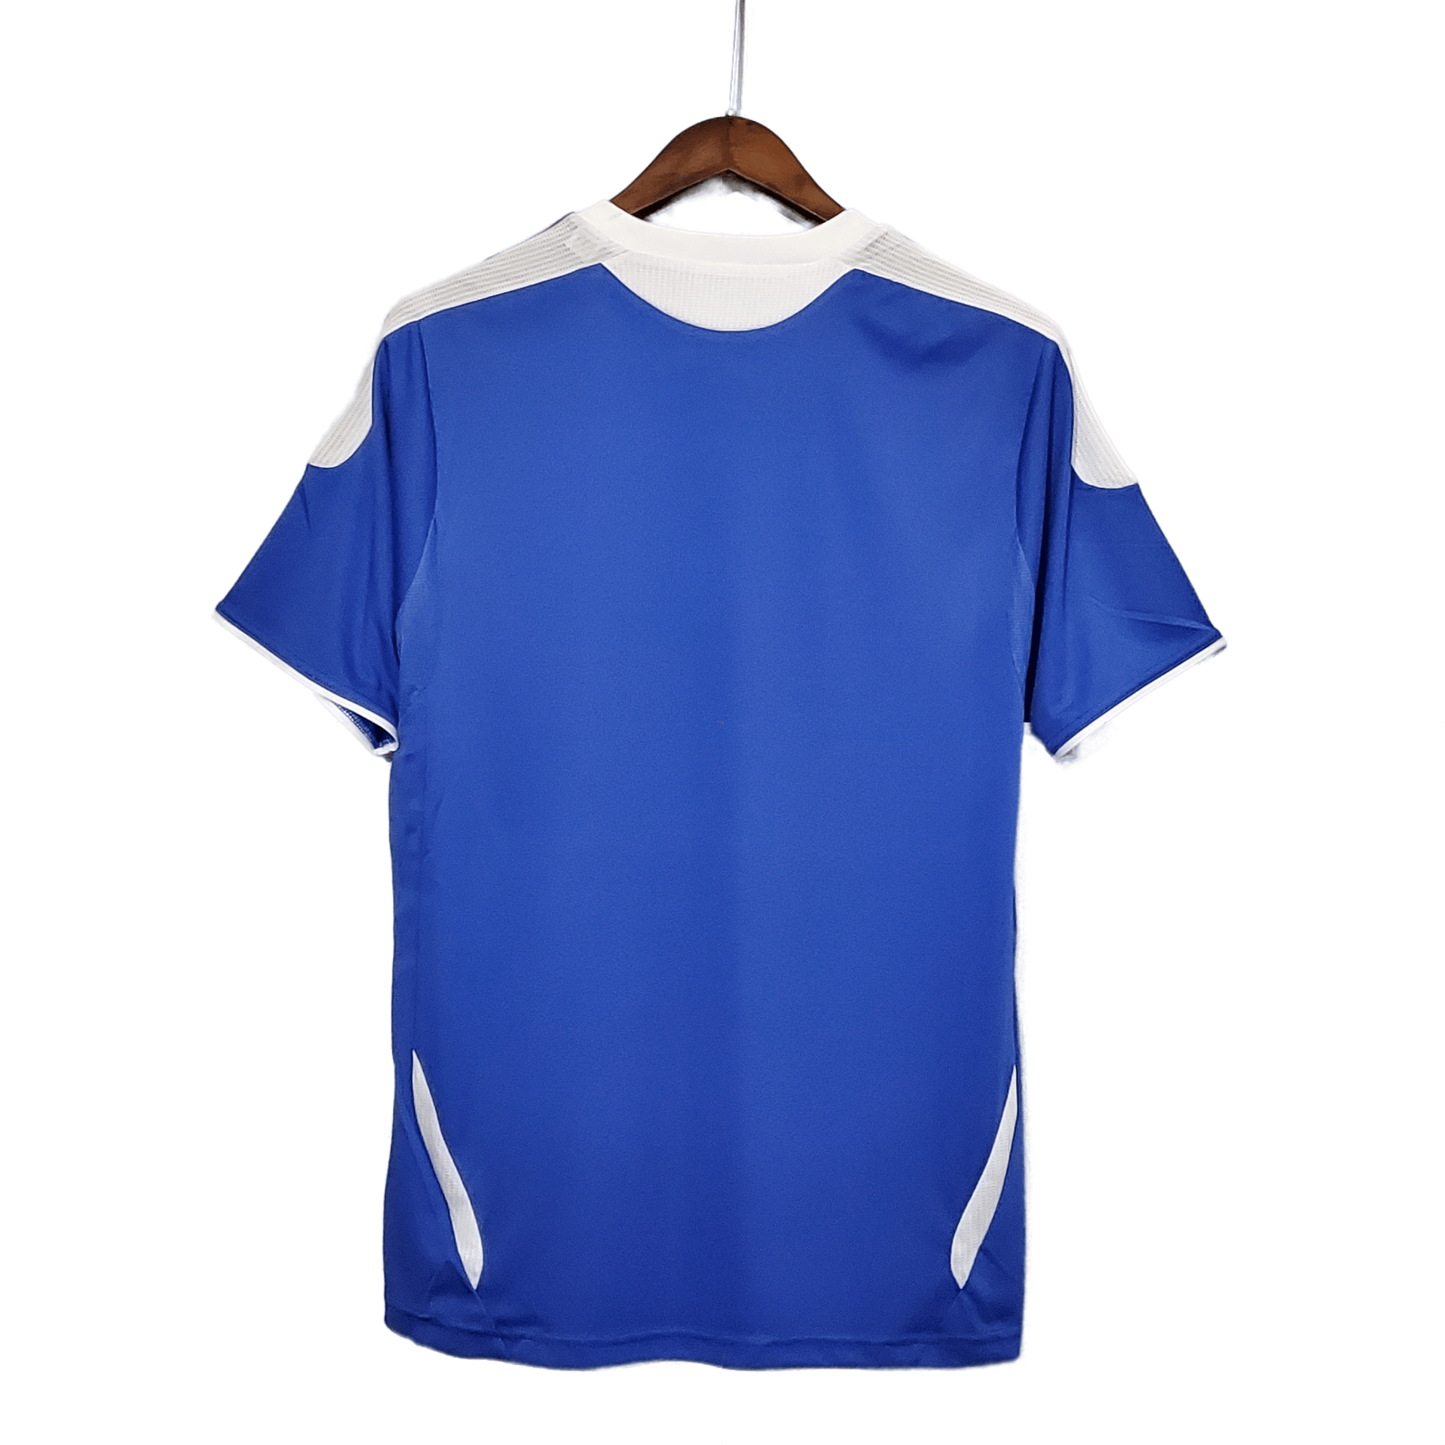 Retro Chelsea 2012/13 UCL Final Jersey